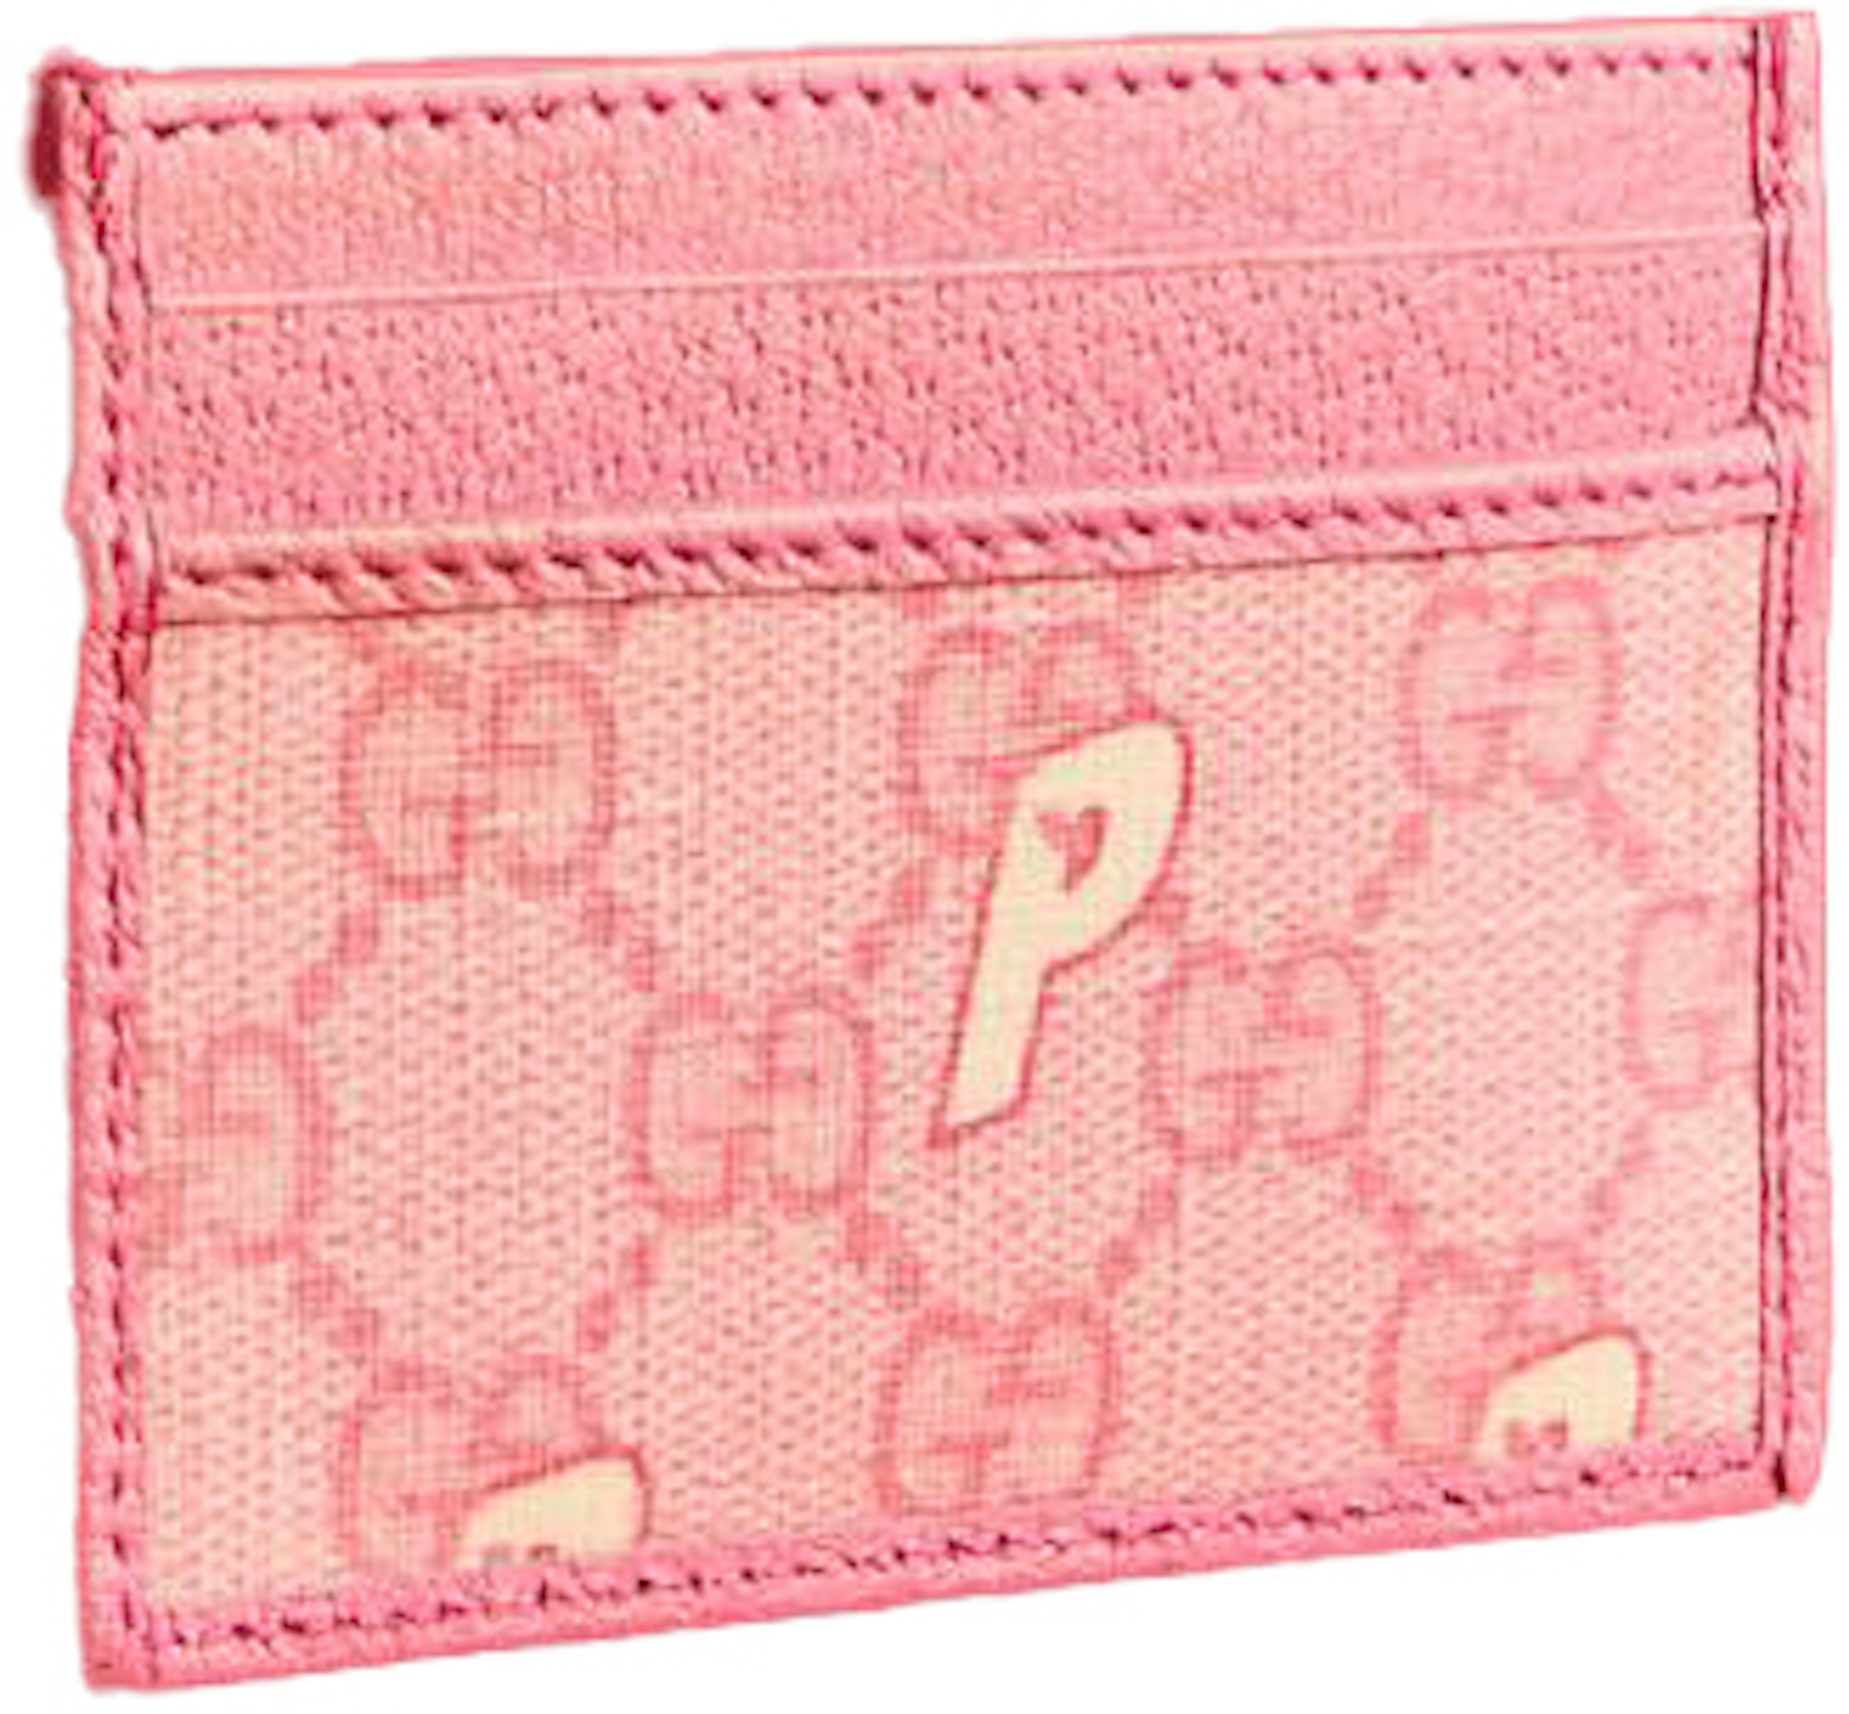 Palace x Gucci GG-P Supreme Card Case Pale Pink in GG Supreme Canvas - US